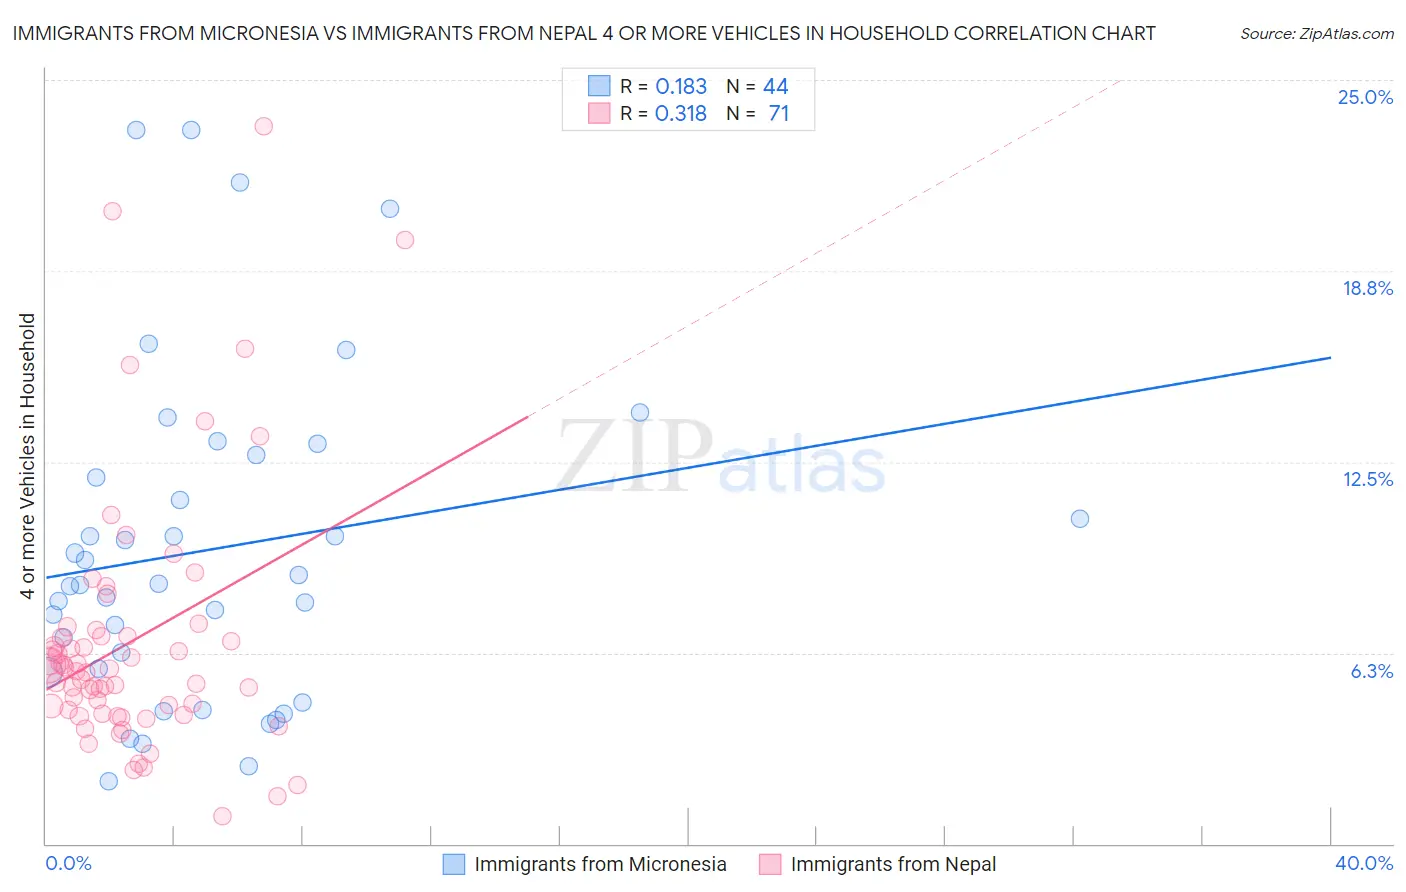 Immigrants from Micronesia vs Immigrants from Nepal 4 or more Vehicles in Household